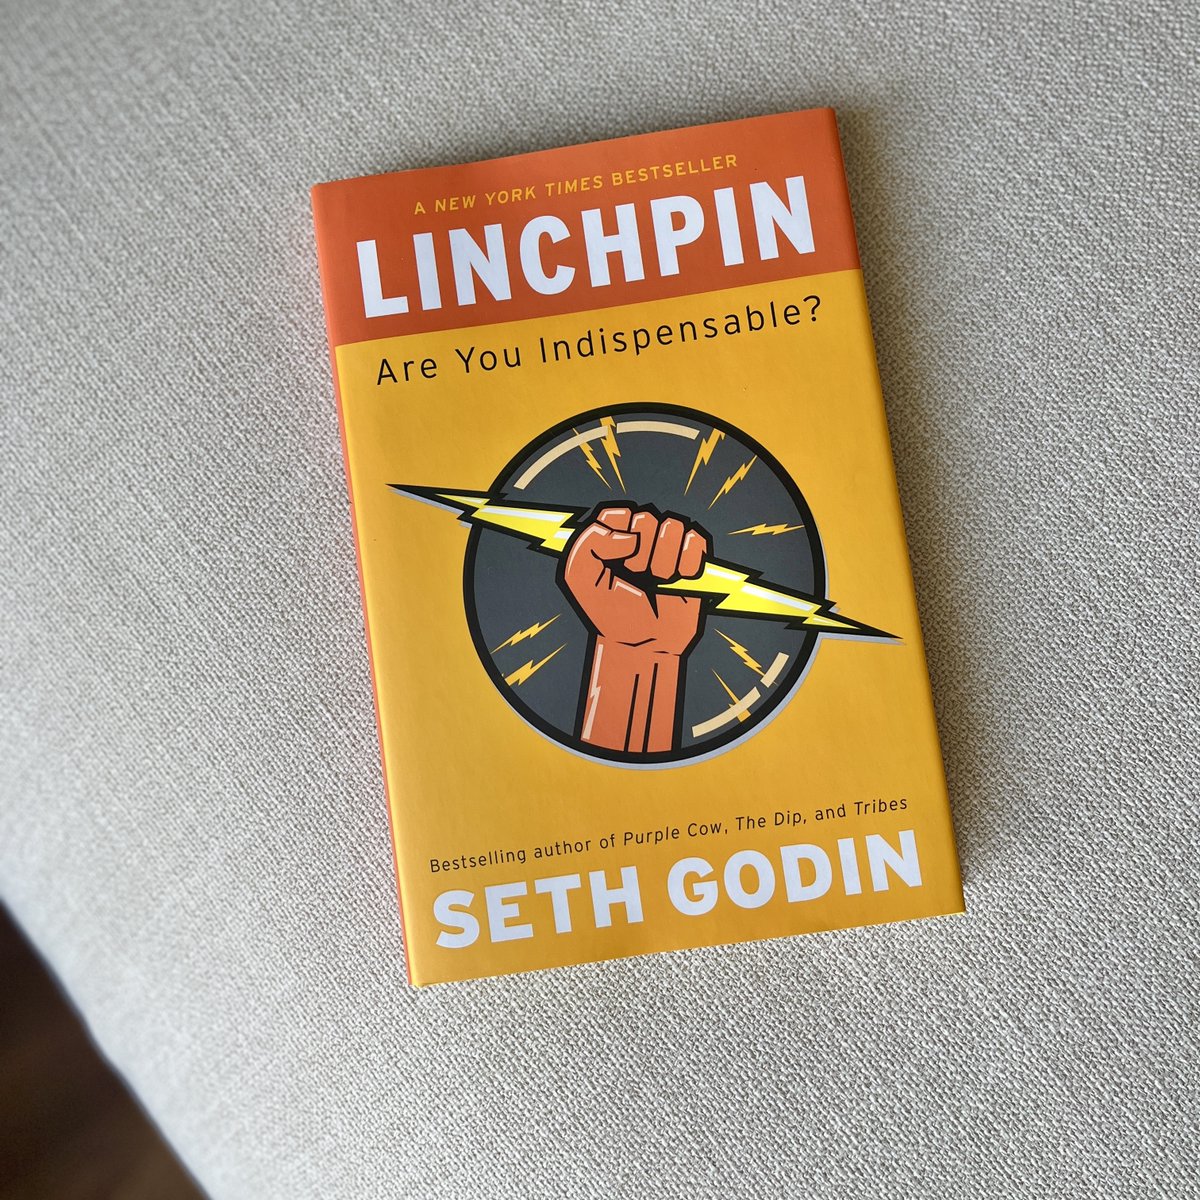 Discover how anyone can be a transformative force within their organization. LINCHPIN is your guide to unlocking this potential. ⚡ Explore Seth Godin's groundbreaking manifesto to start adding distinctive value and making impactful contributions to your team.